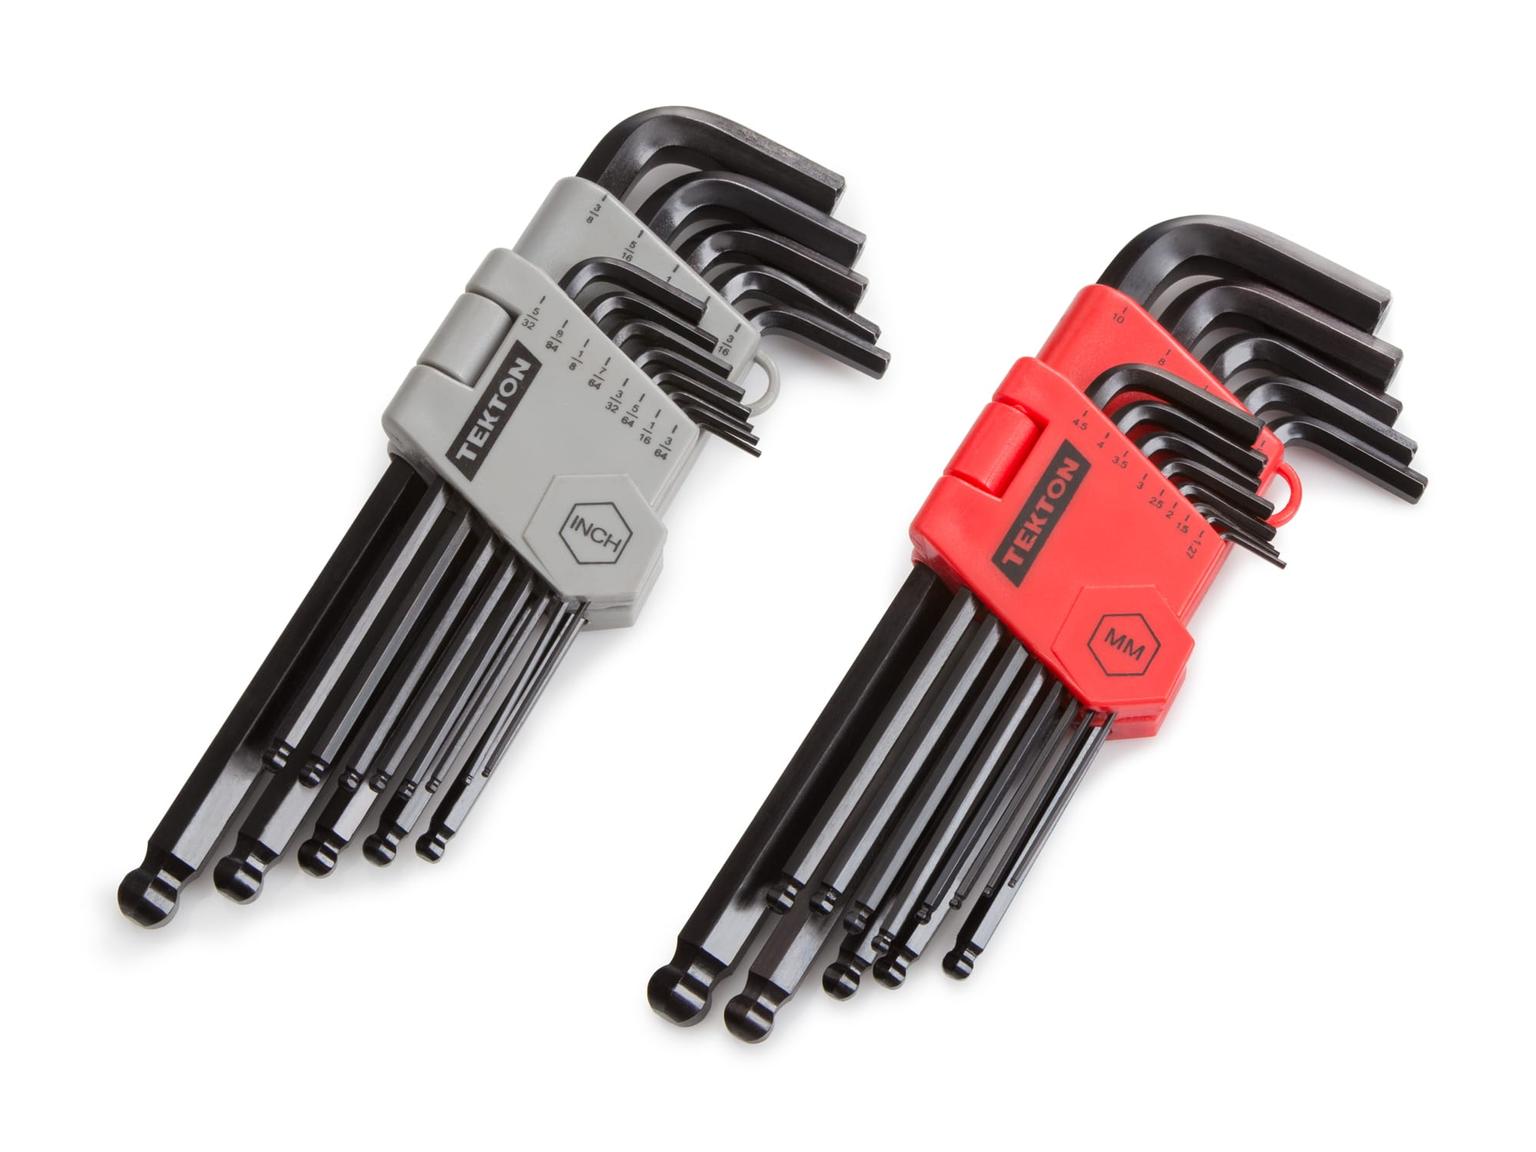 TEKTON 25282-T Ball End Hex Key Wrench Set, 26-Piece (3/64-3/8 in., 1.27-10 mm)